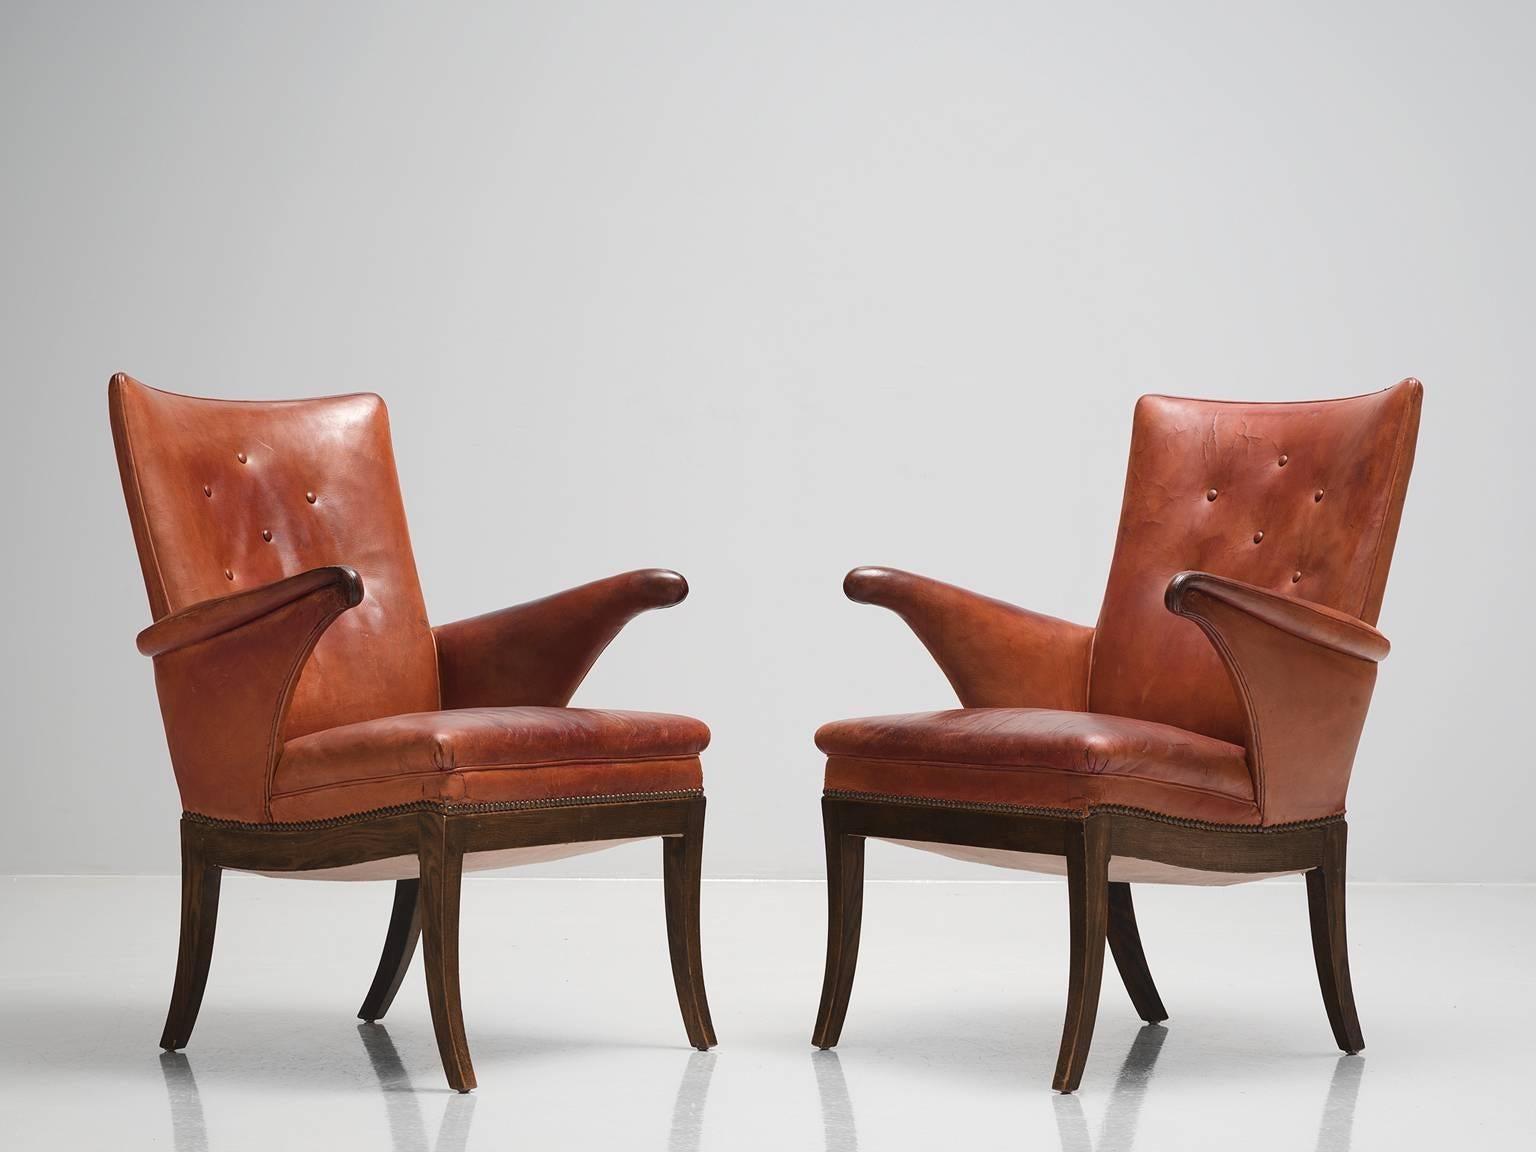 Frits Henningsen, pair of cognac leather armchairs in mahogany, Denmark, 1930s.

This pair of comfortable lounge chairs was designed and produced by master cabinet maker Frits Henningsen, circa 1930s. The balanced, rigid lines of the solid